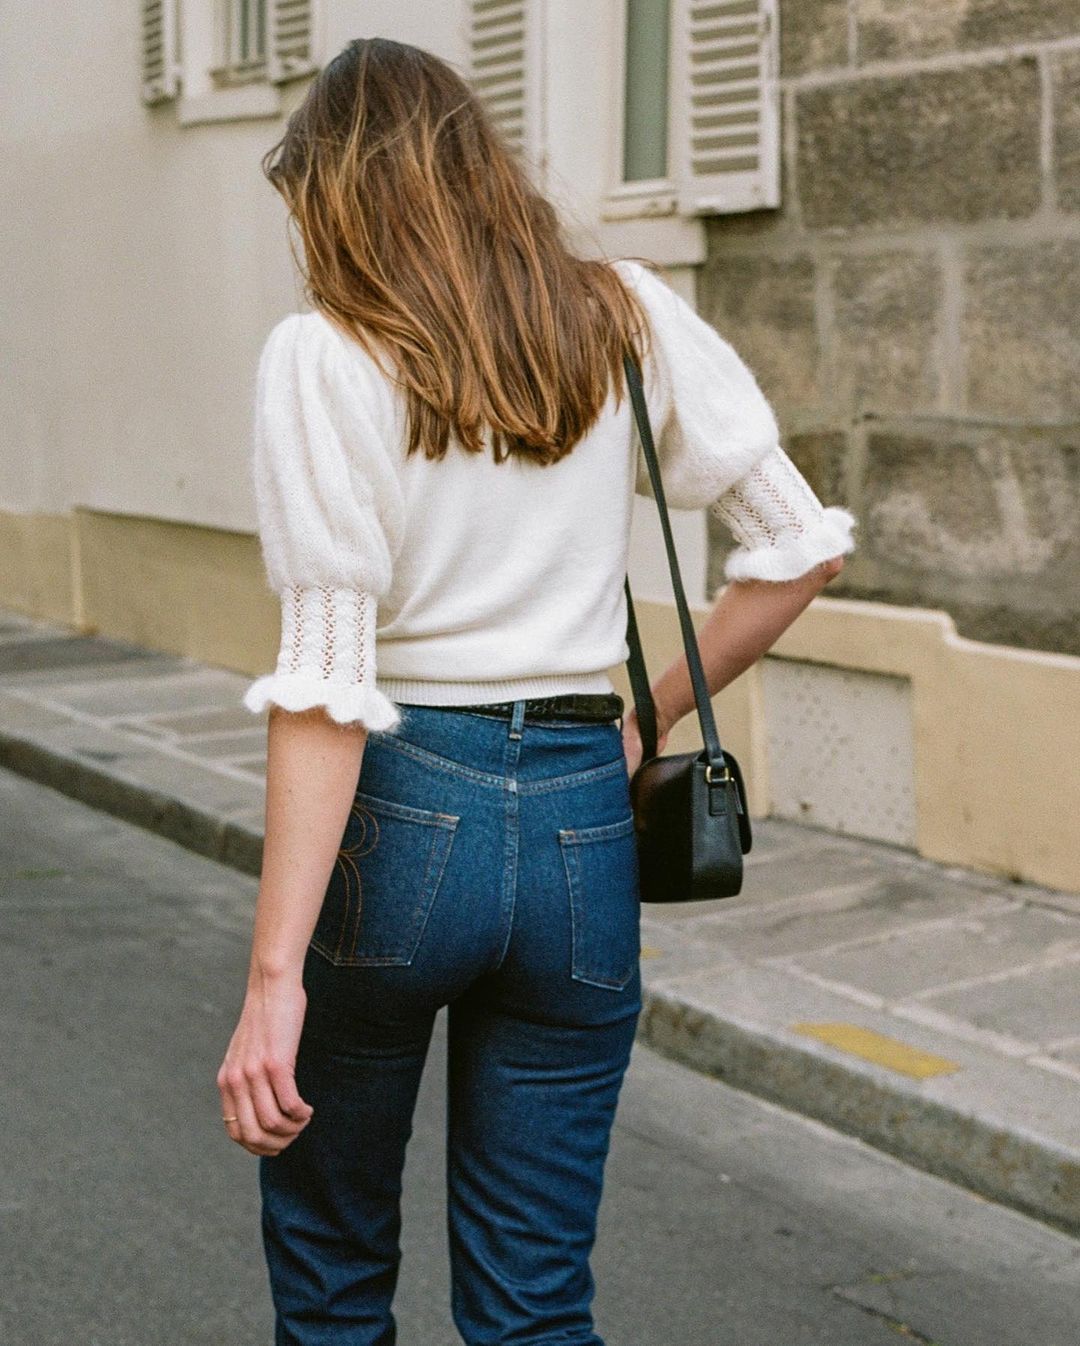 — Jeans